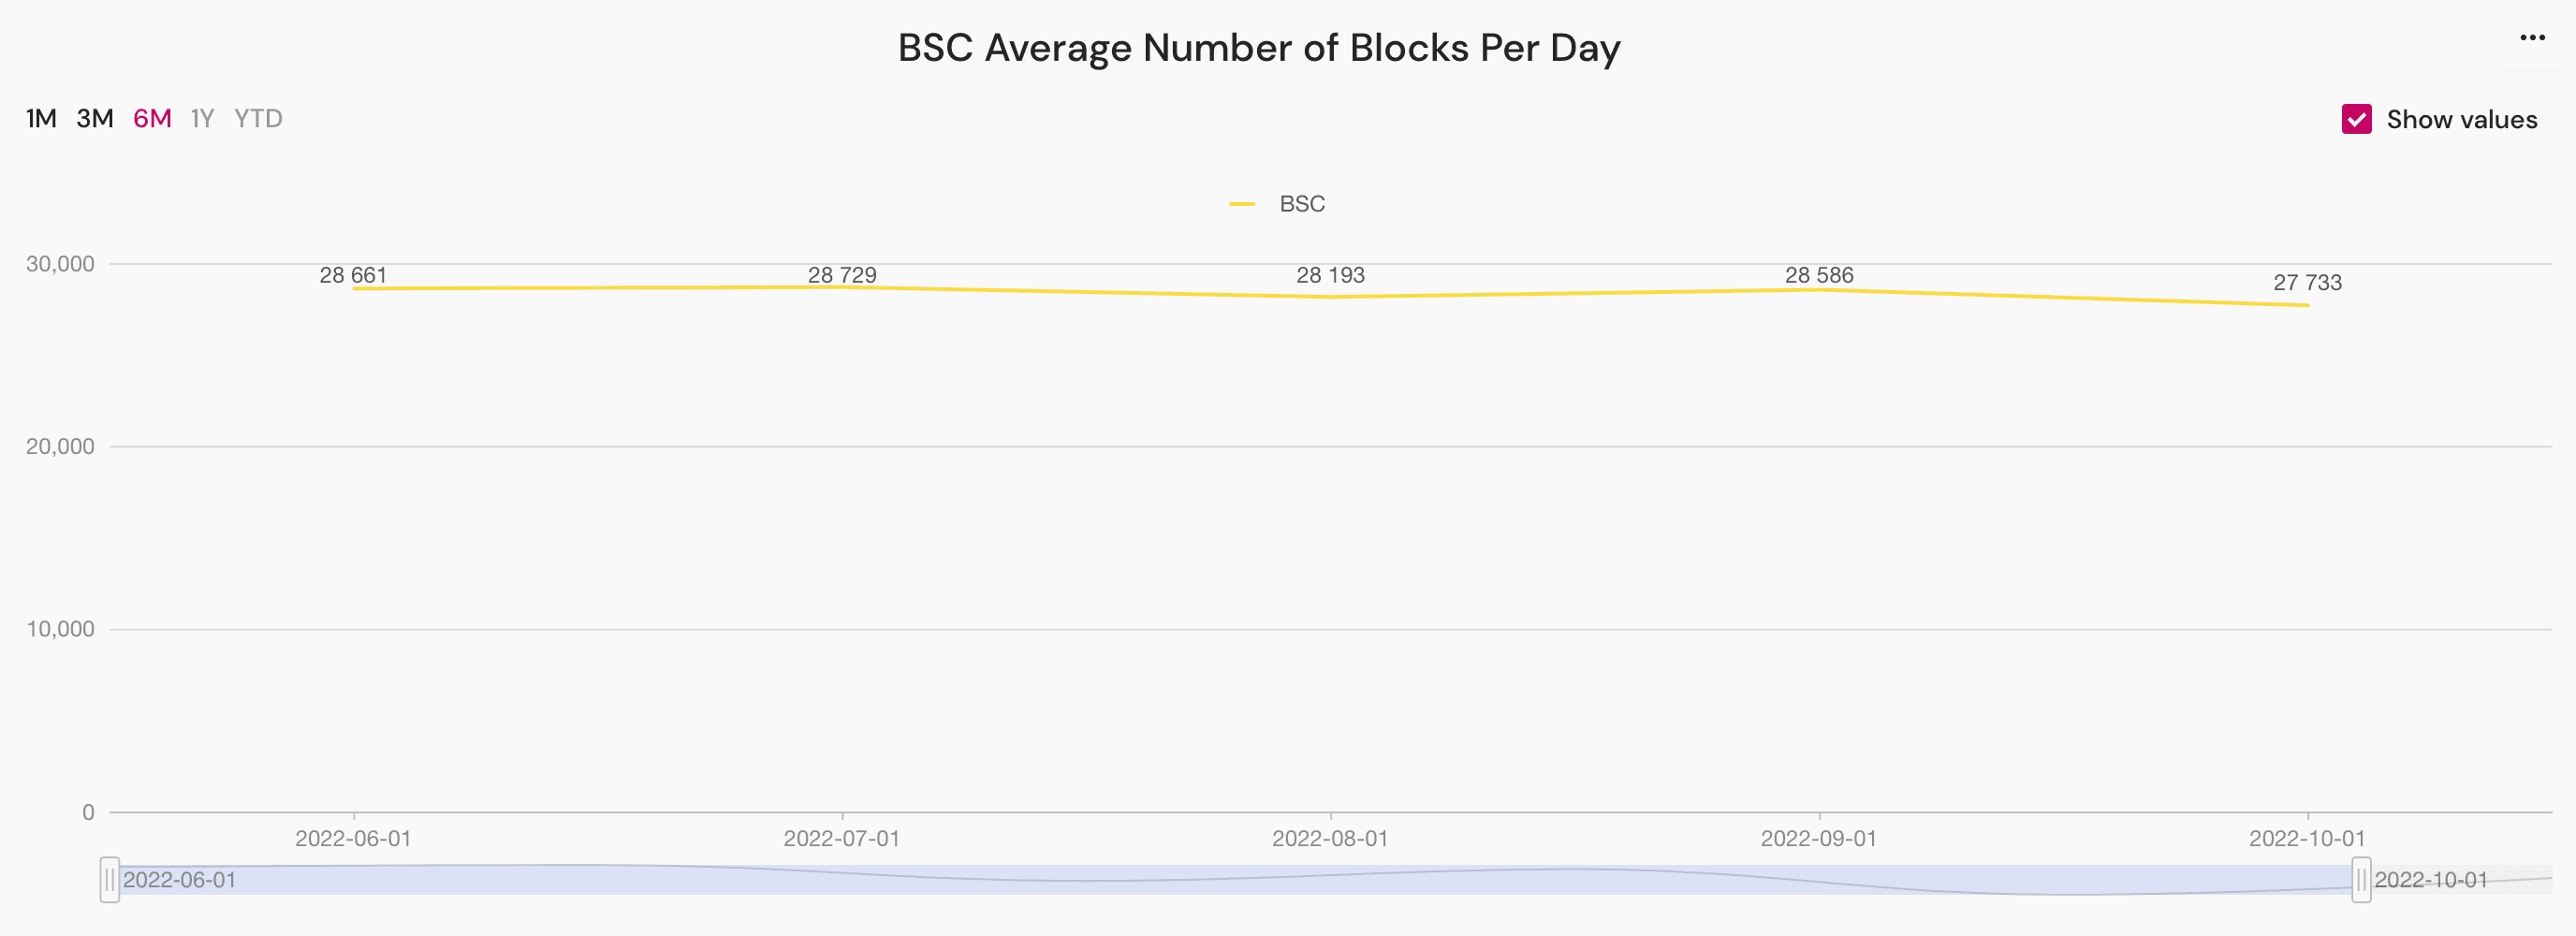 BSC Average Number of Blocks Per Day